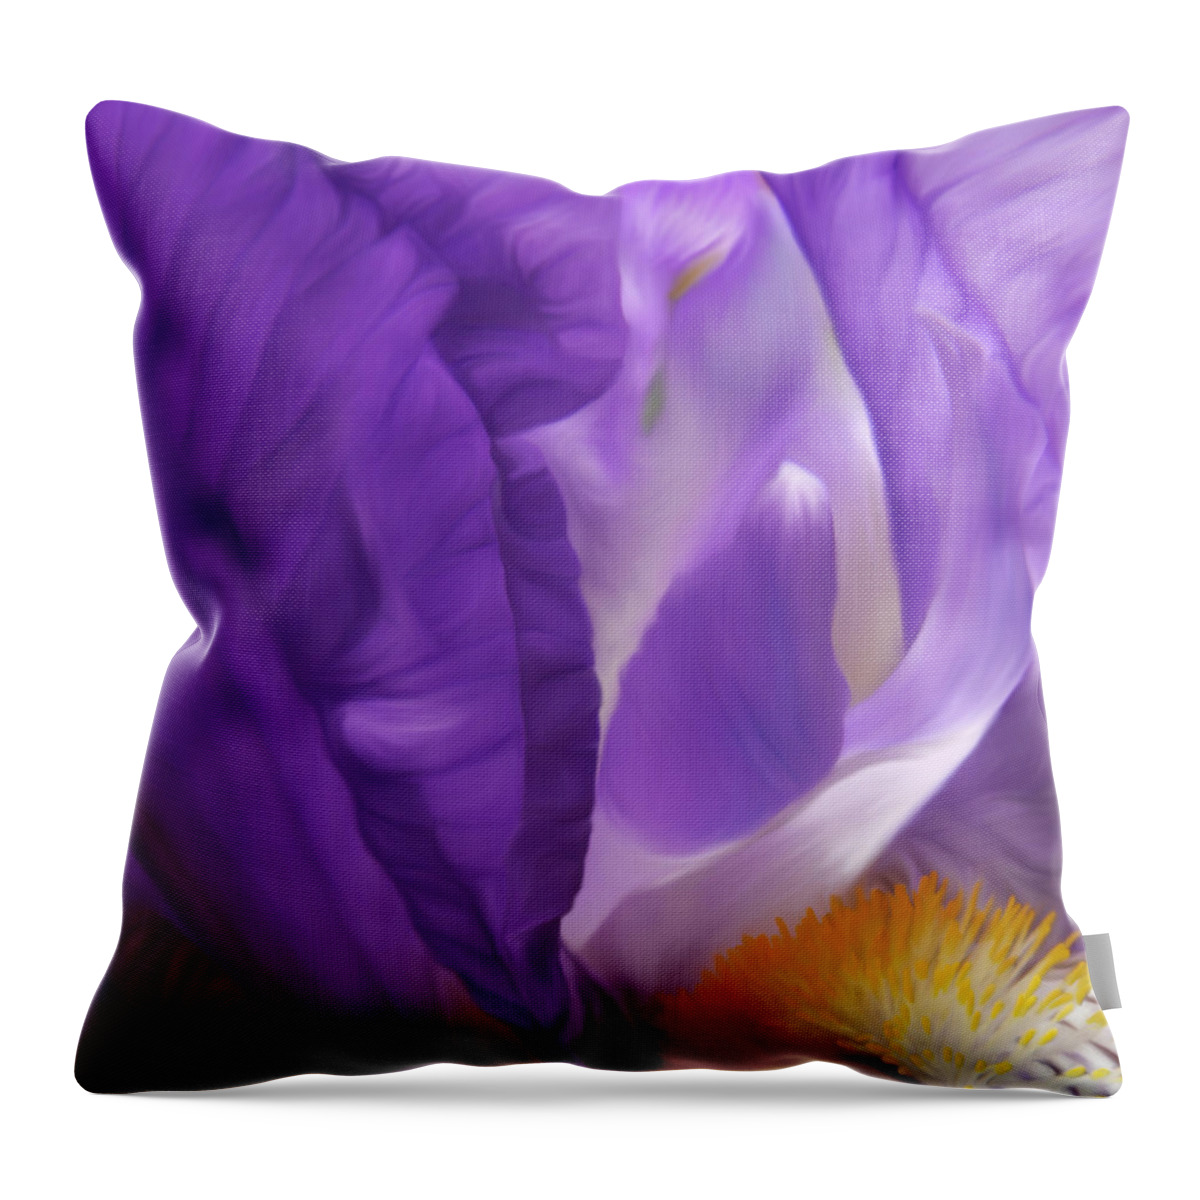 Thumbelina Dreaming Throw Pillow featuring the photograph Thumbelina Dreaming by Barbara St Jean